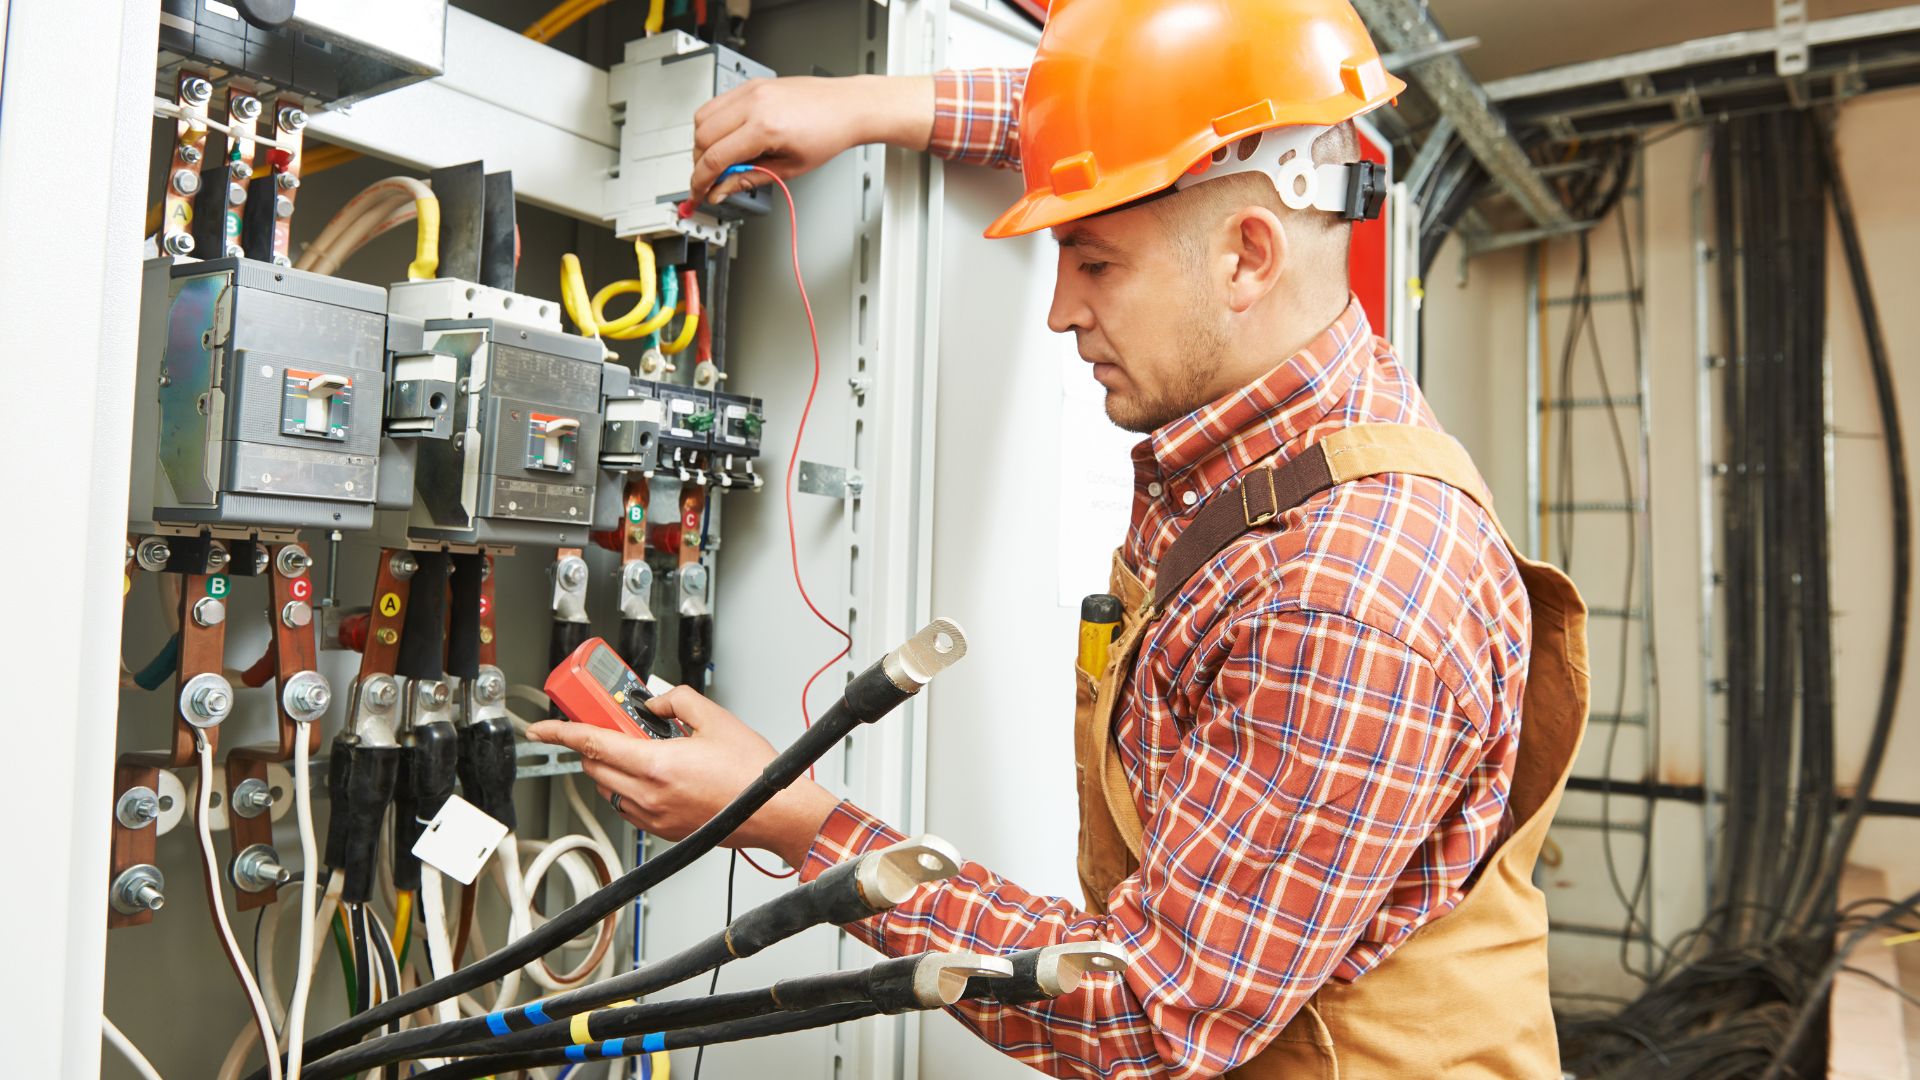 Diagnosing Typical Electrical Issues: Electrical Services for Effective Troubleshooting